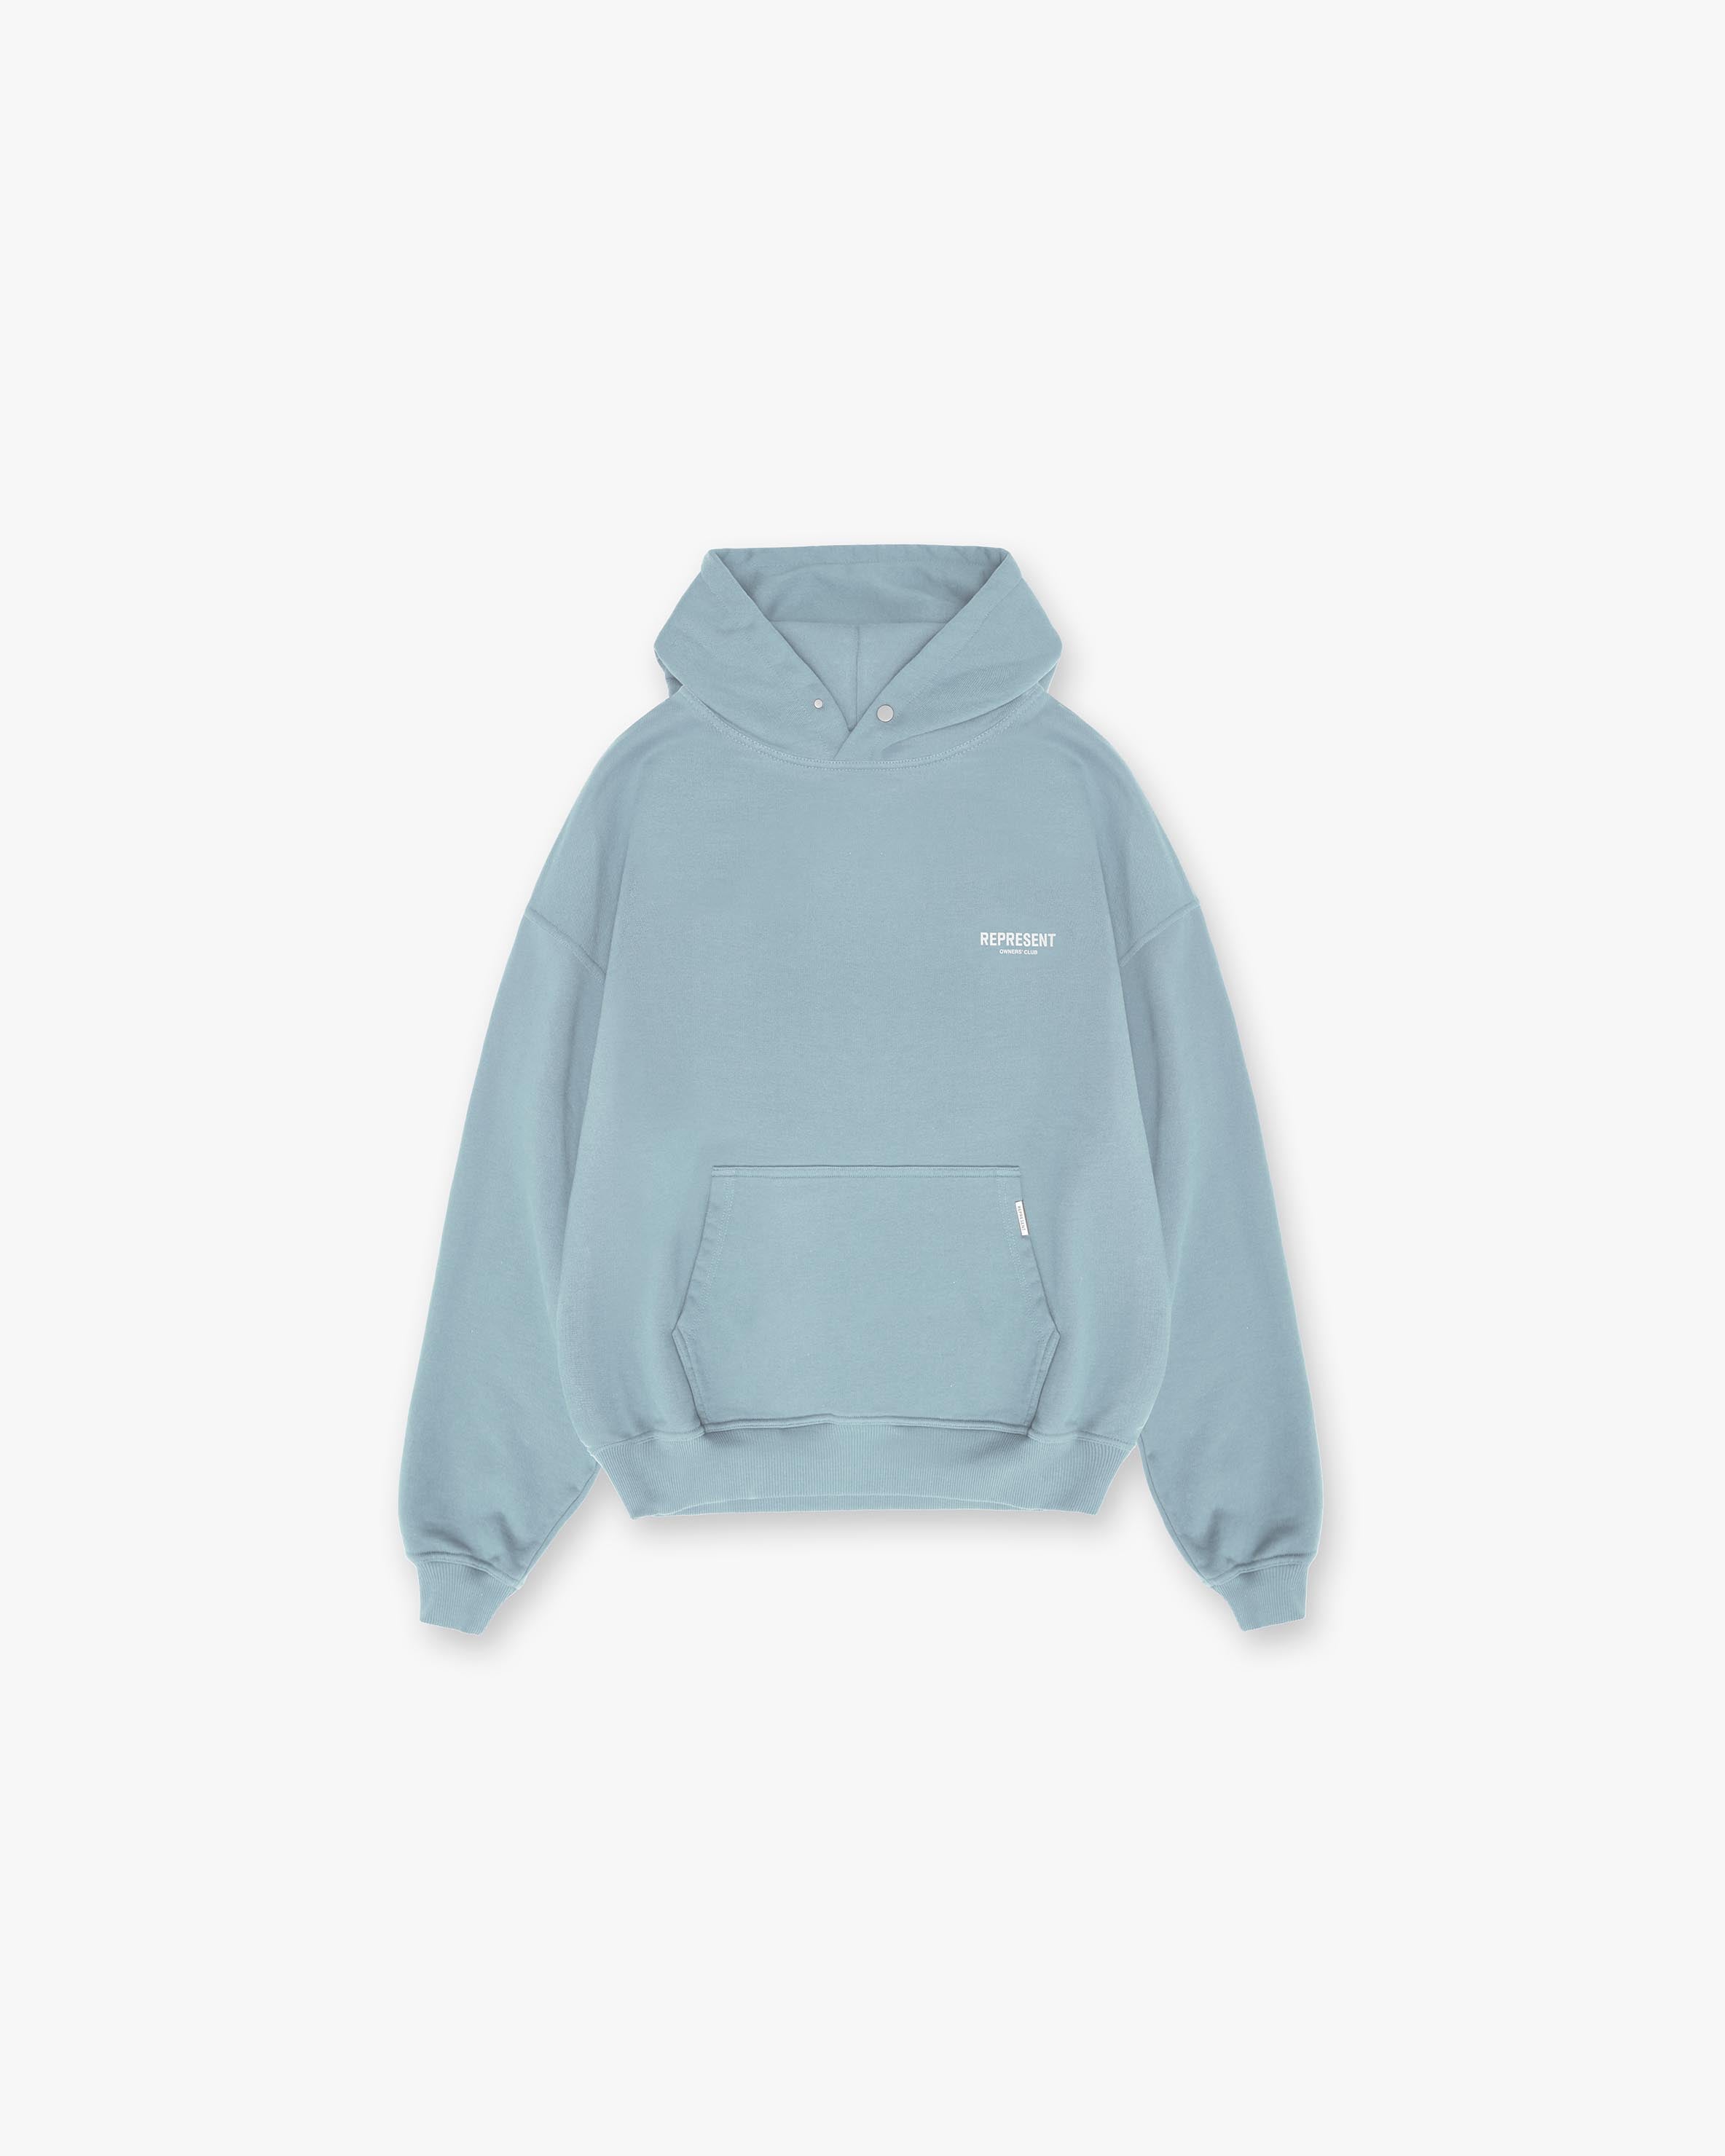 Powder Blue Sweater | Owners Club | REPRESENT CLO